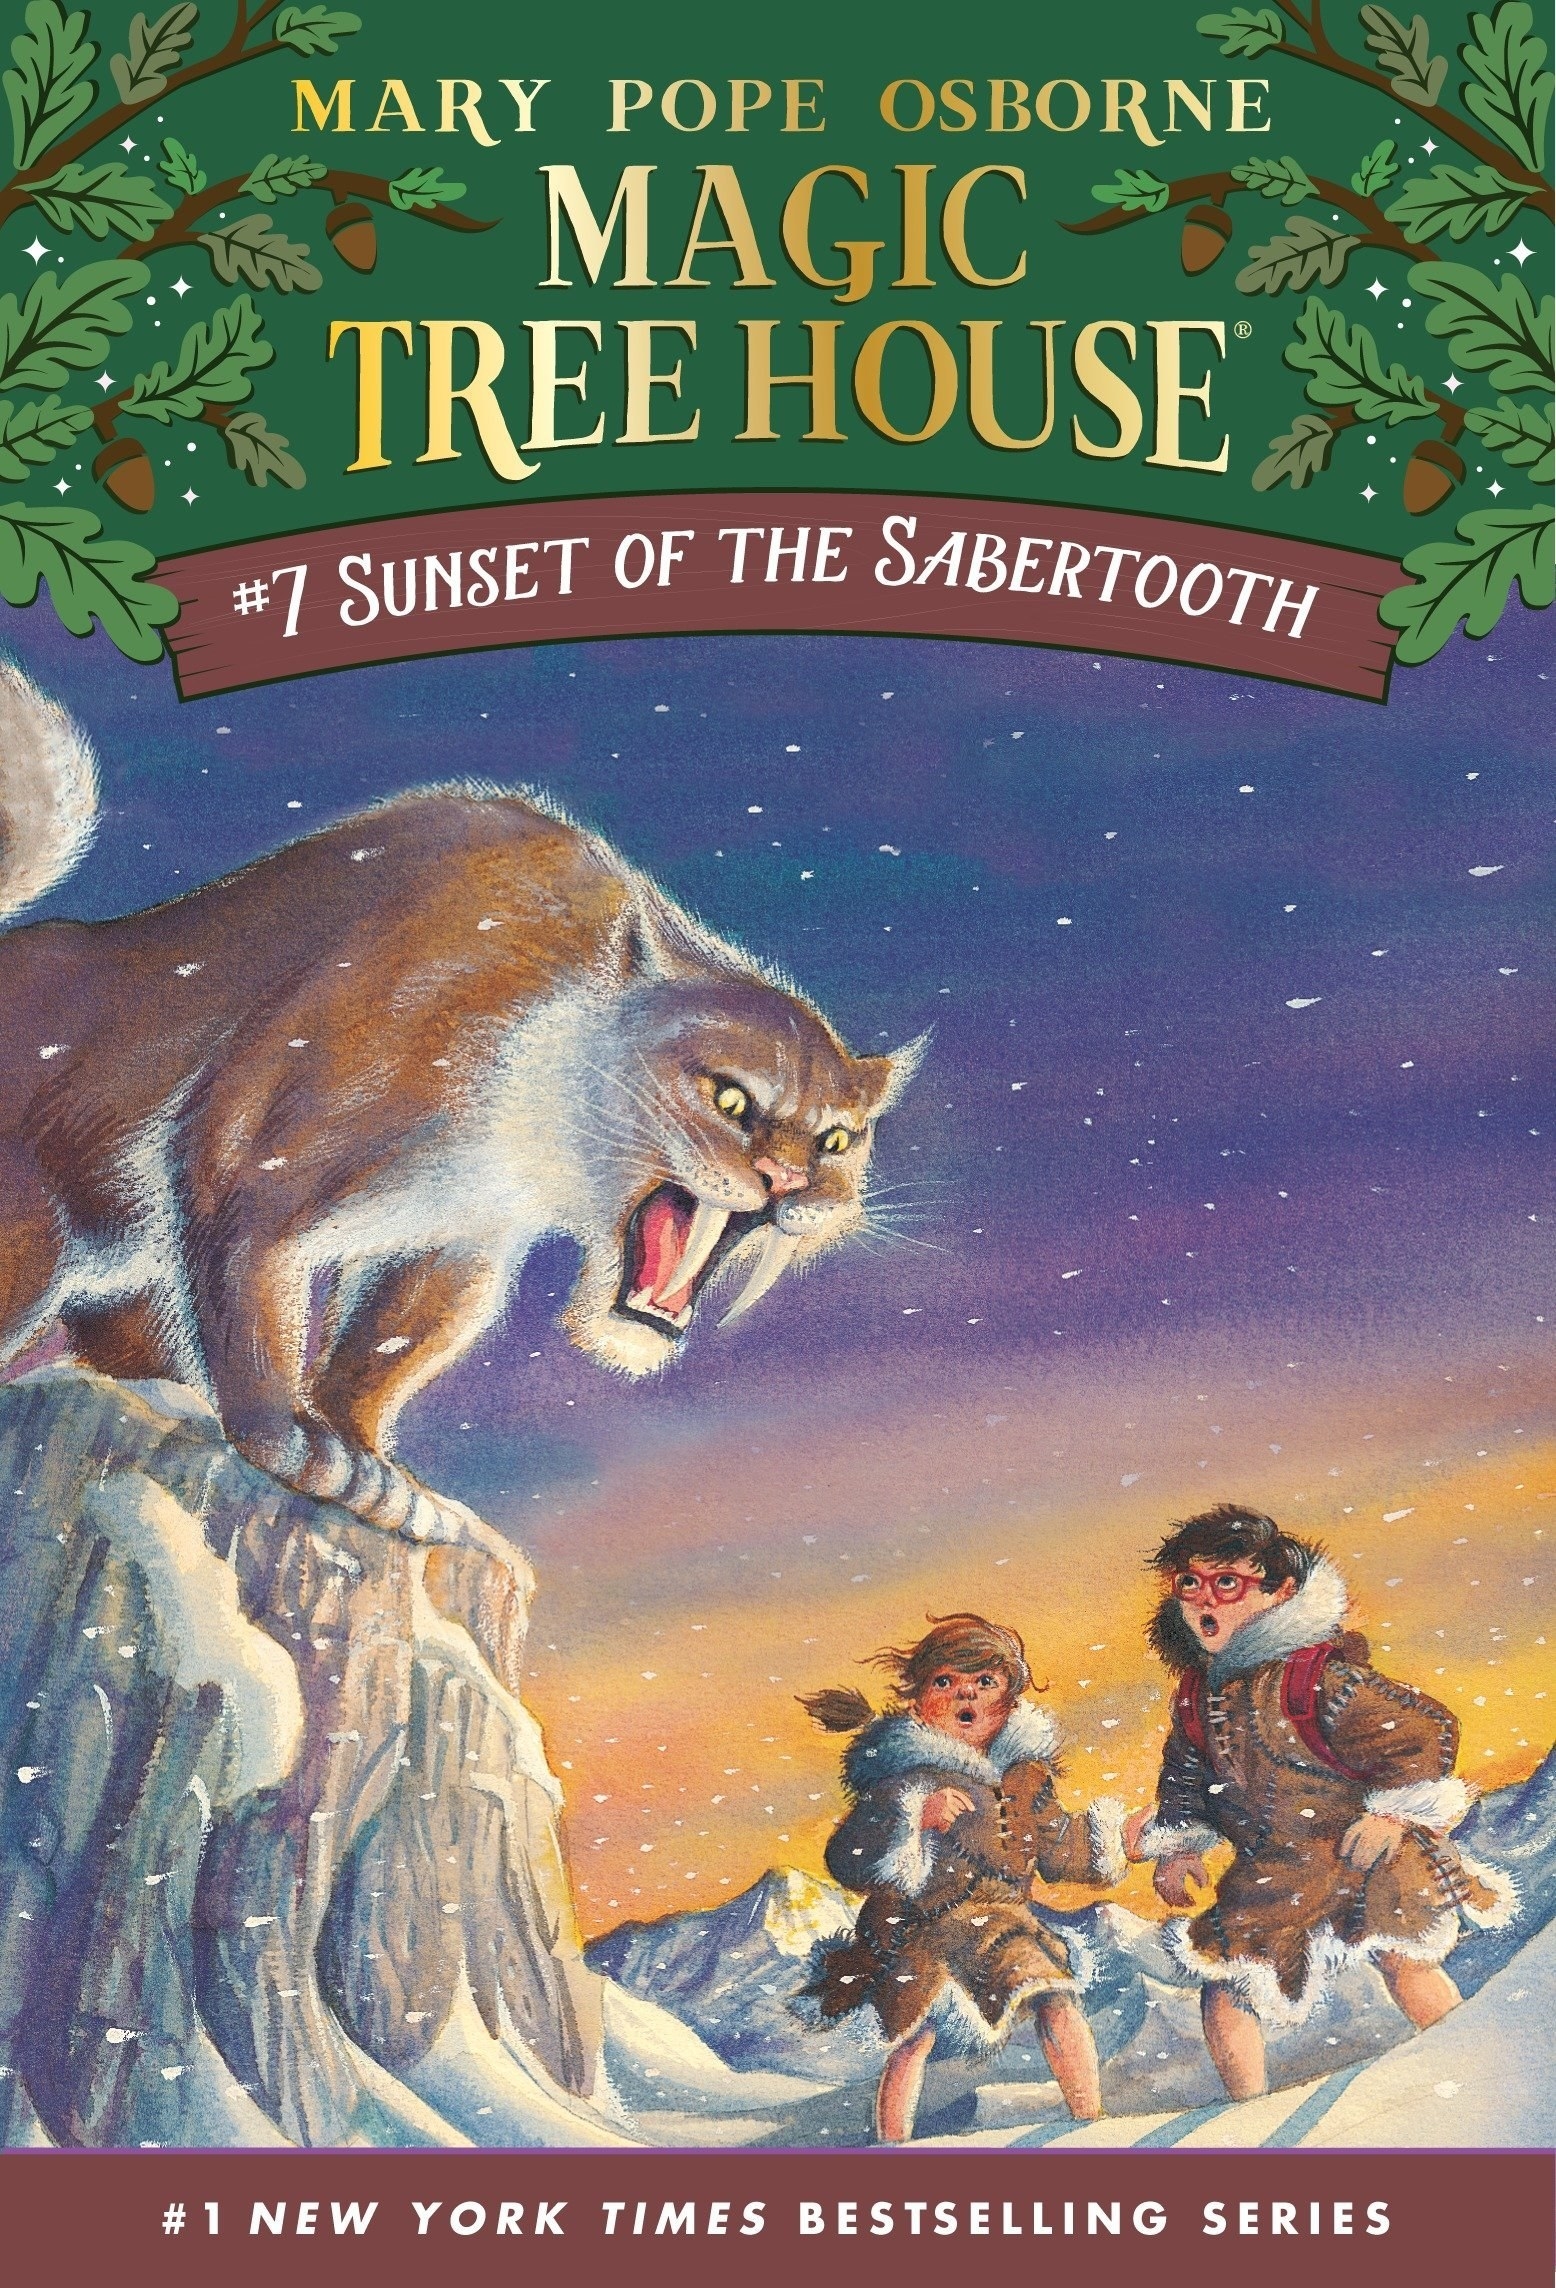 A book cover from &quot;The Magic Tree House&quot; series by Mary Pope Osborne